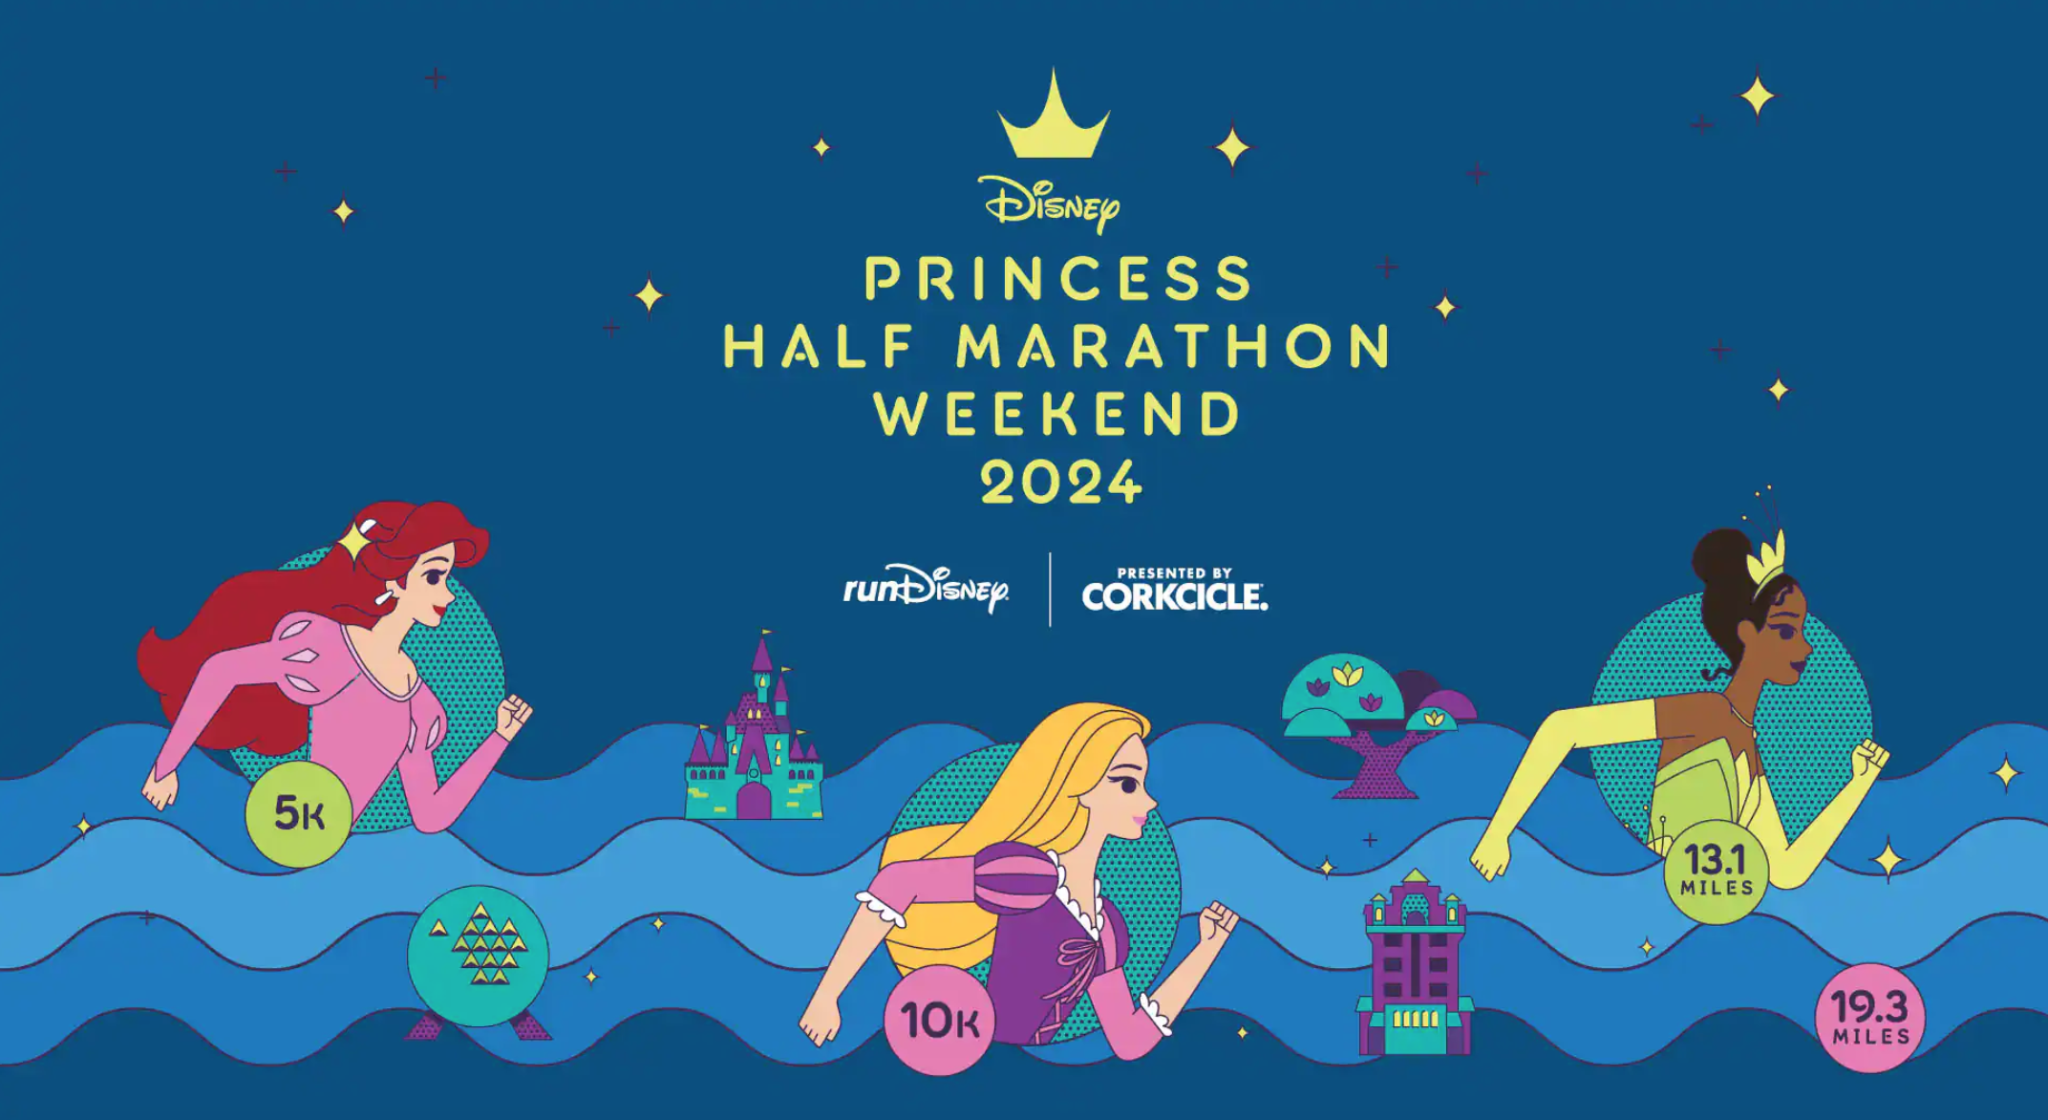 FIRST LOOK at the Themes for Disney's Princess Half Marathon in 2024